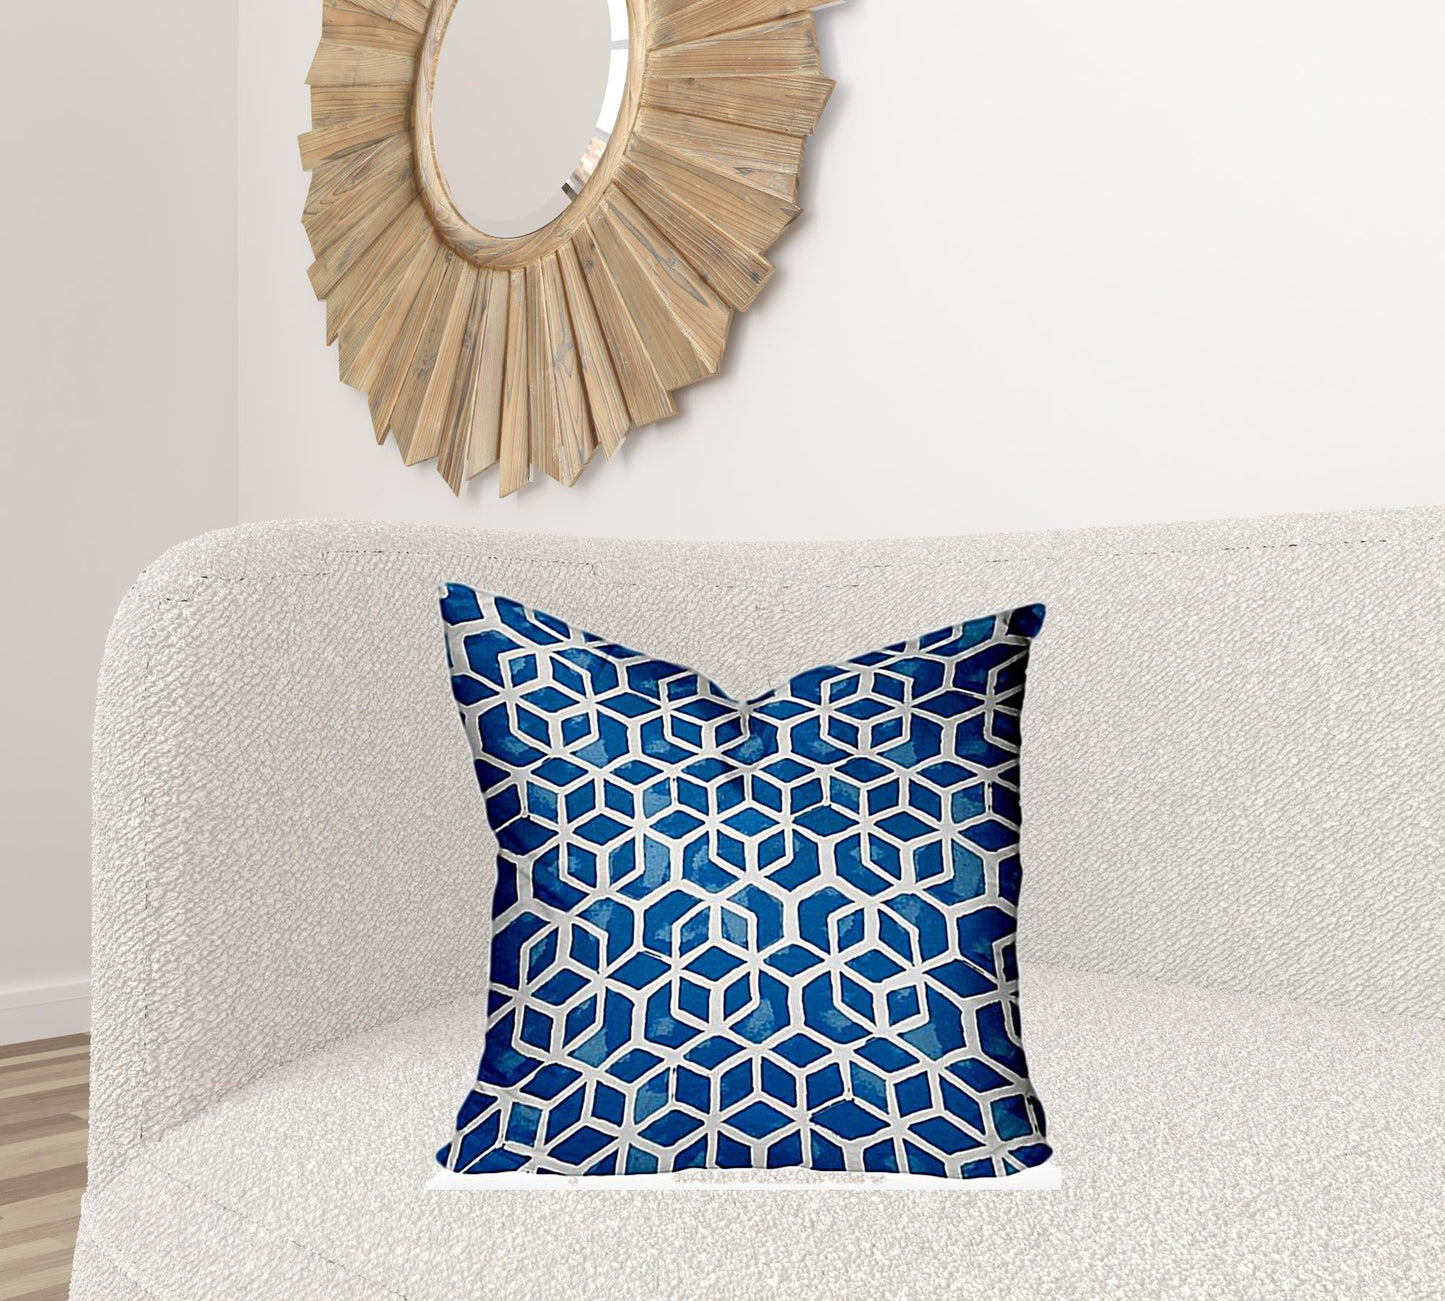 22" X 22" Blue And White Enveloped Geometric Throw Indoor Outdoor Pillow